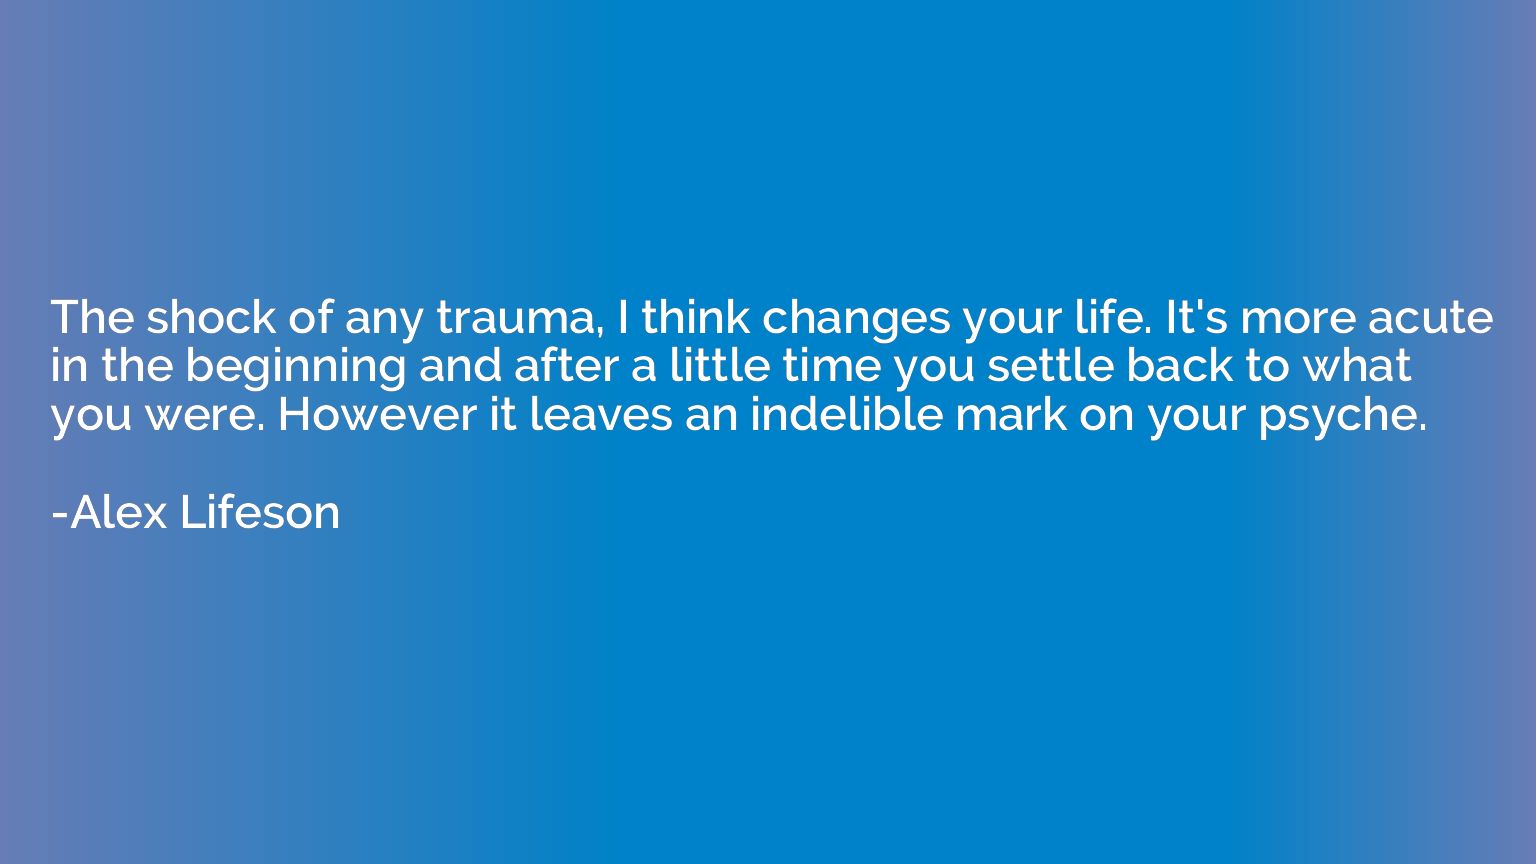 The shock of any trauma, I think changes your life. It's mor